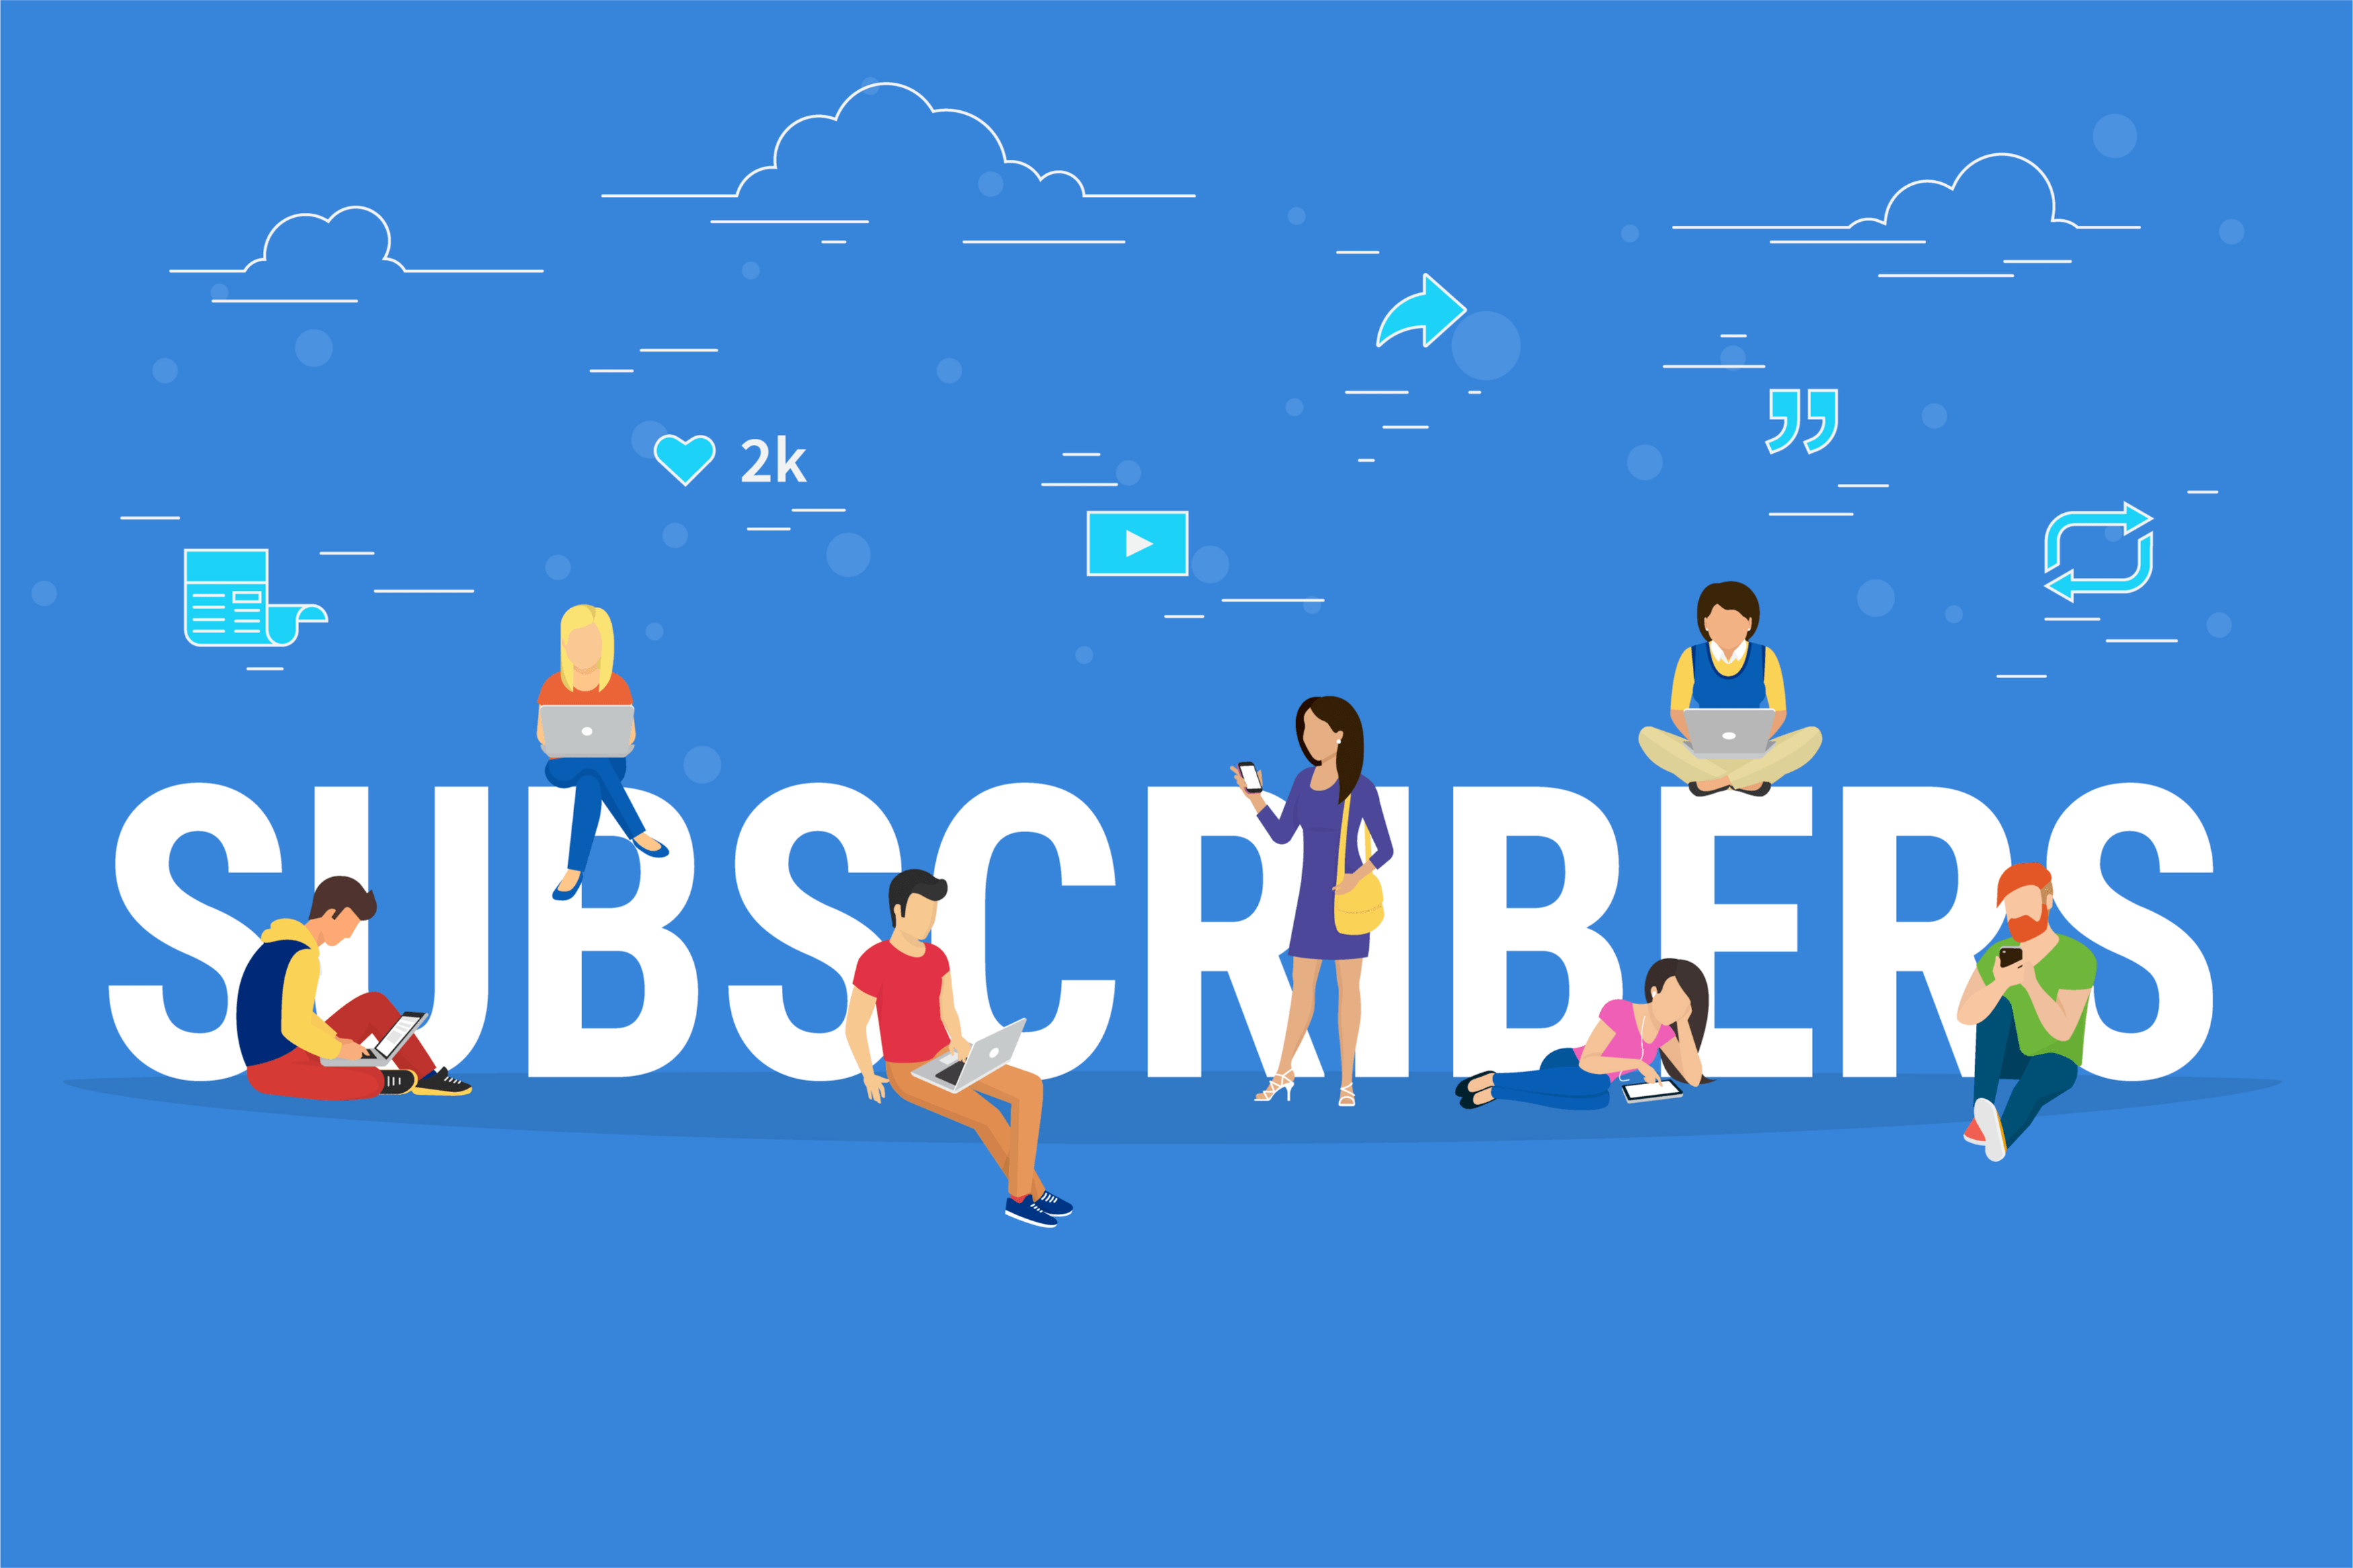 Traffic Case Study – How To Get 200,000 Subscribers In Just 10 Days